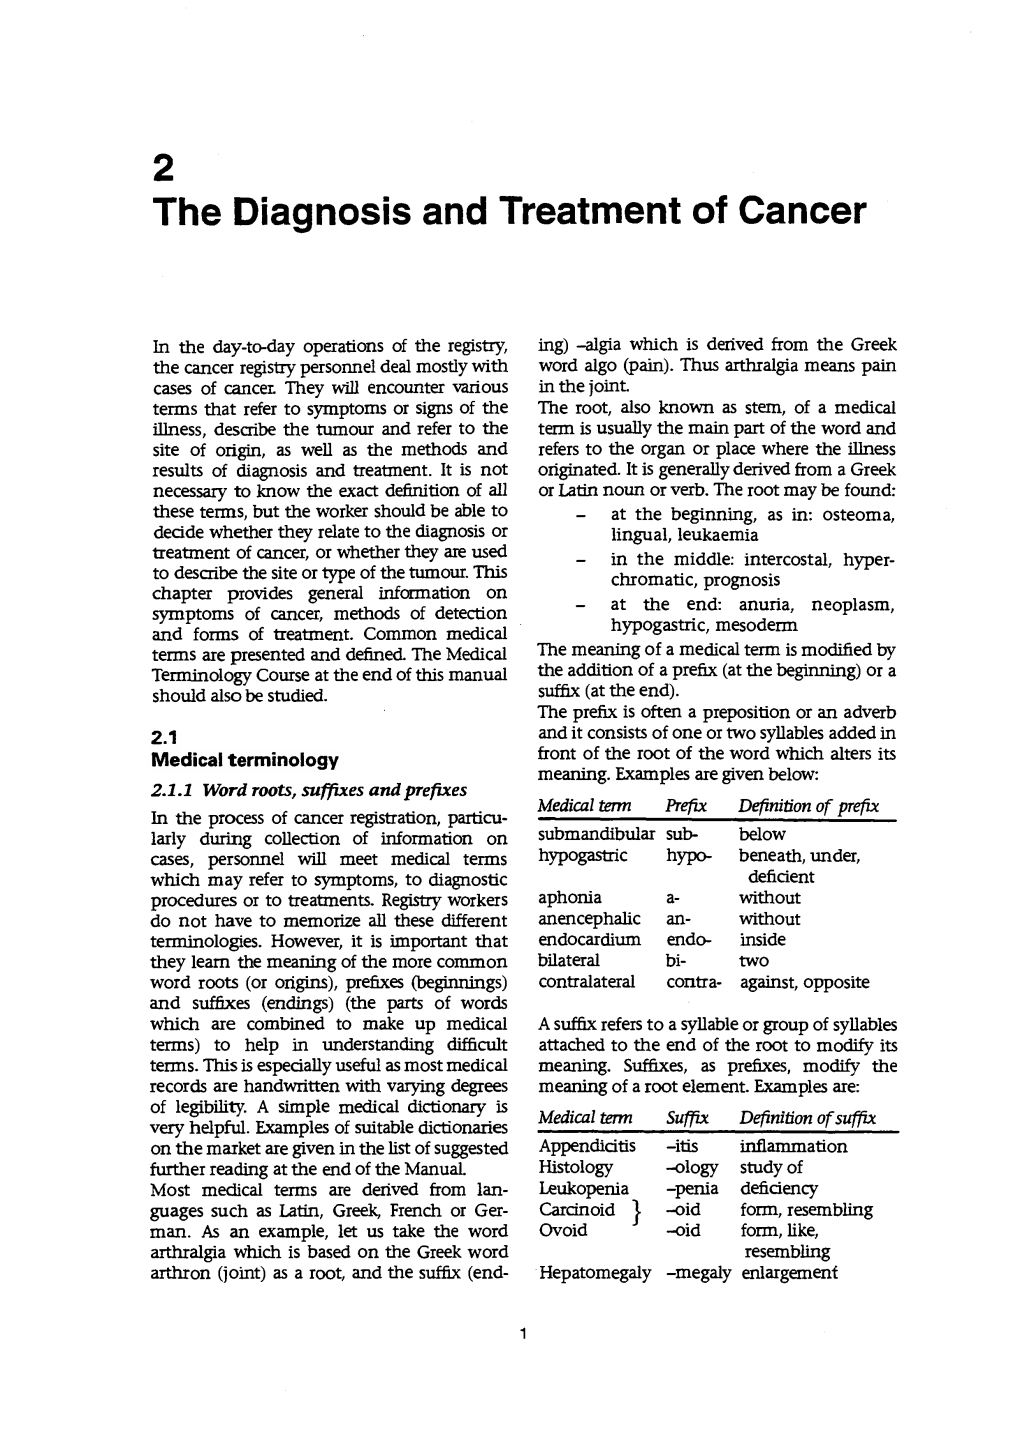 2 the Diagnosis and Treatment of Cancer